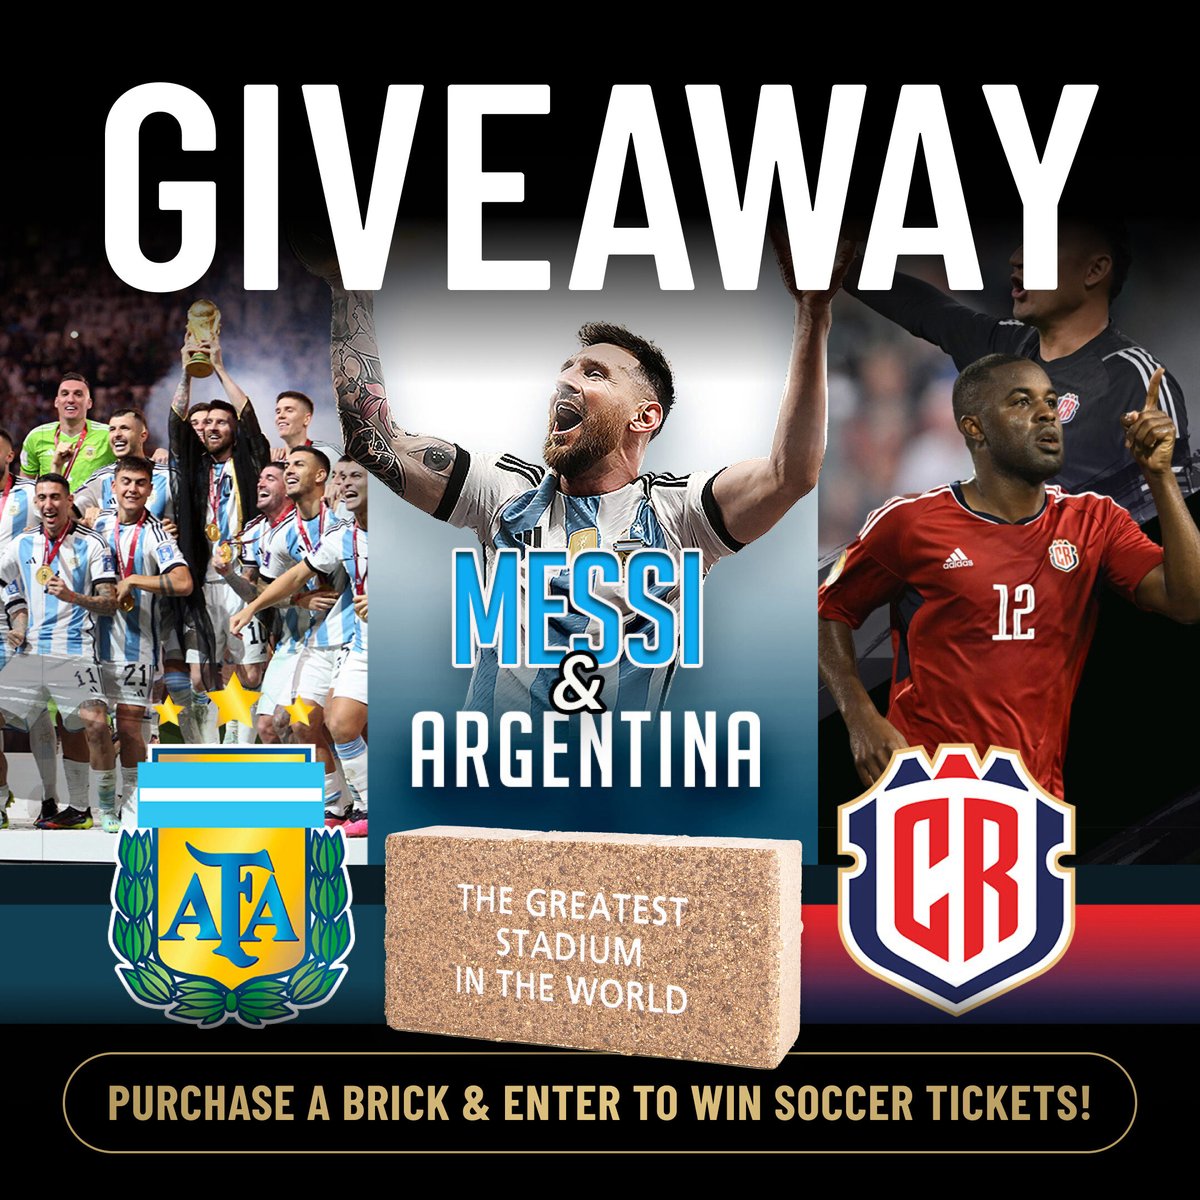 Purchase a custom brick in the Coliseum's new Centennial Legacy Walkway and be entered to win a 4-pack of tickets to Argentina vs Costa Rica on Tuesday, March 26! Visit coliseumlegacy.com to enter now! Winner will be contacted by email; contest closes on 3/11 at 11:59pm ⏰